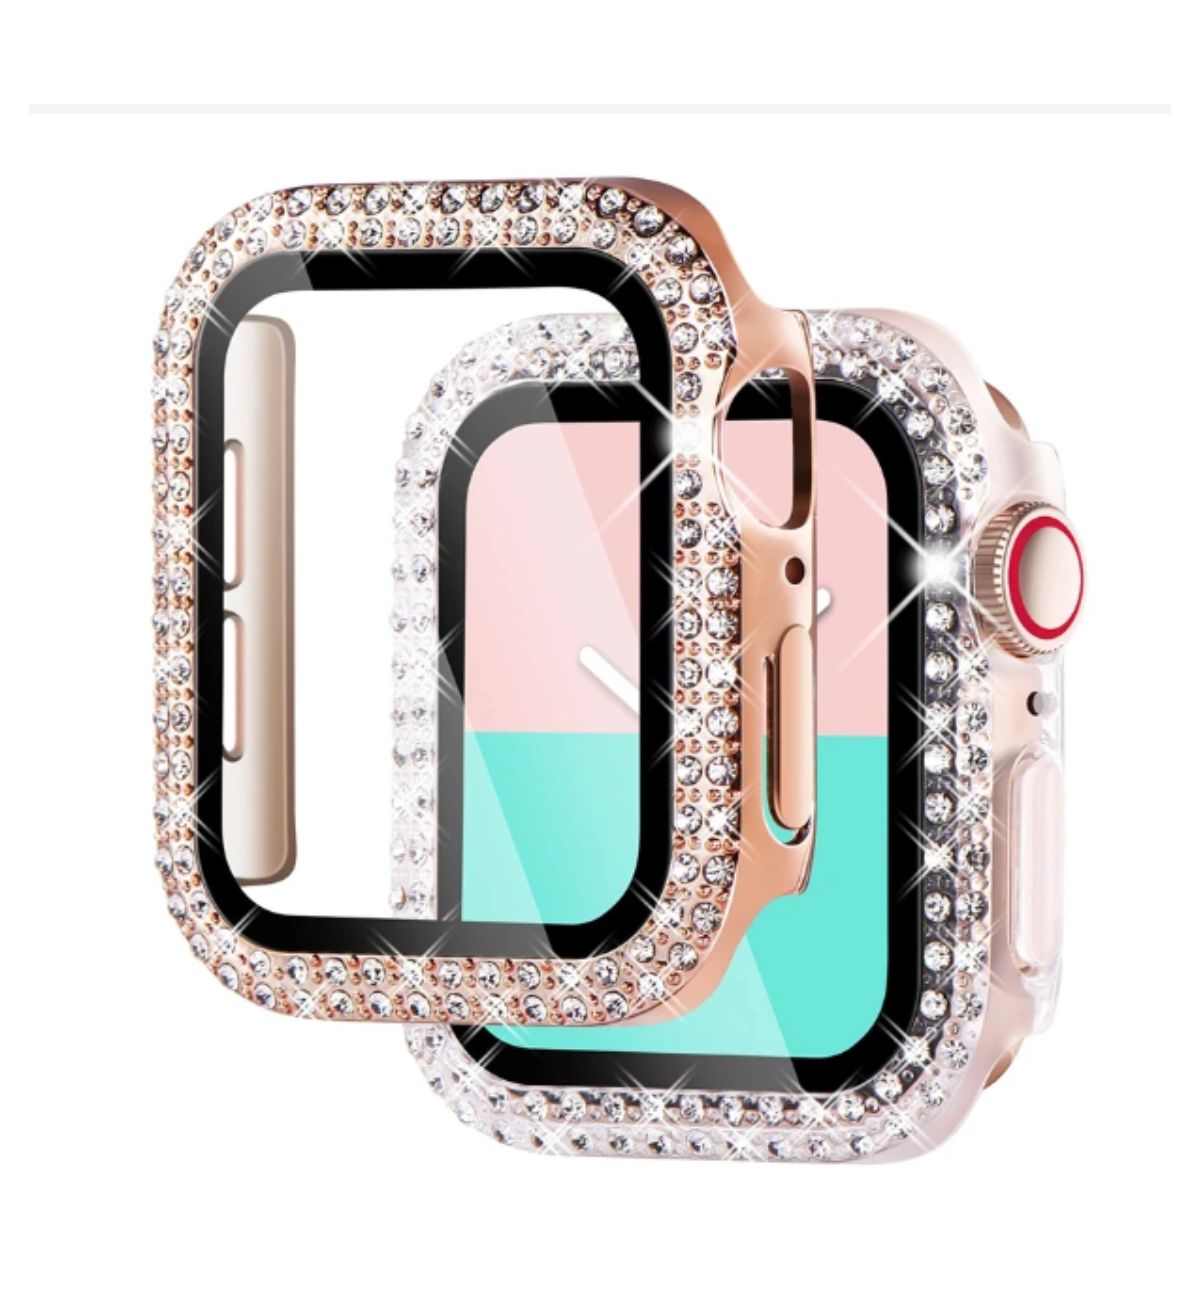 Image of Apple Watch with Diamond Case: Close-up of a sparkling diamond case adorned Apple Watch (44mm) on a wrist.